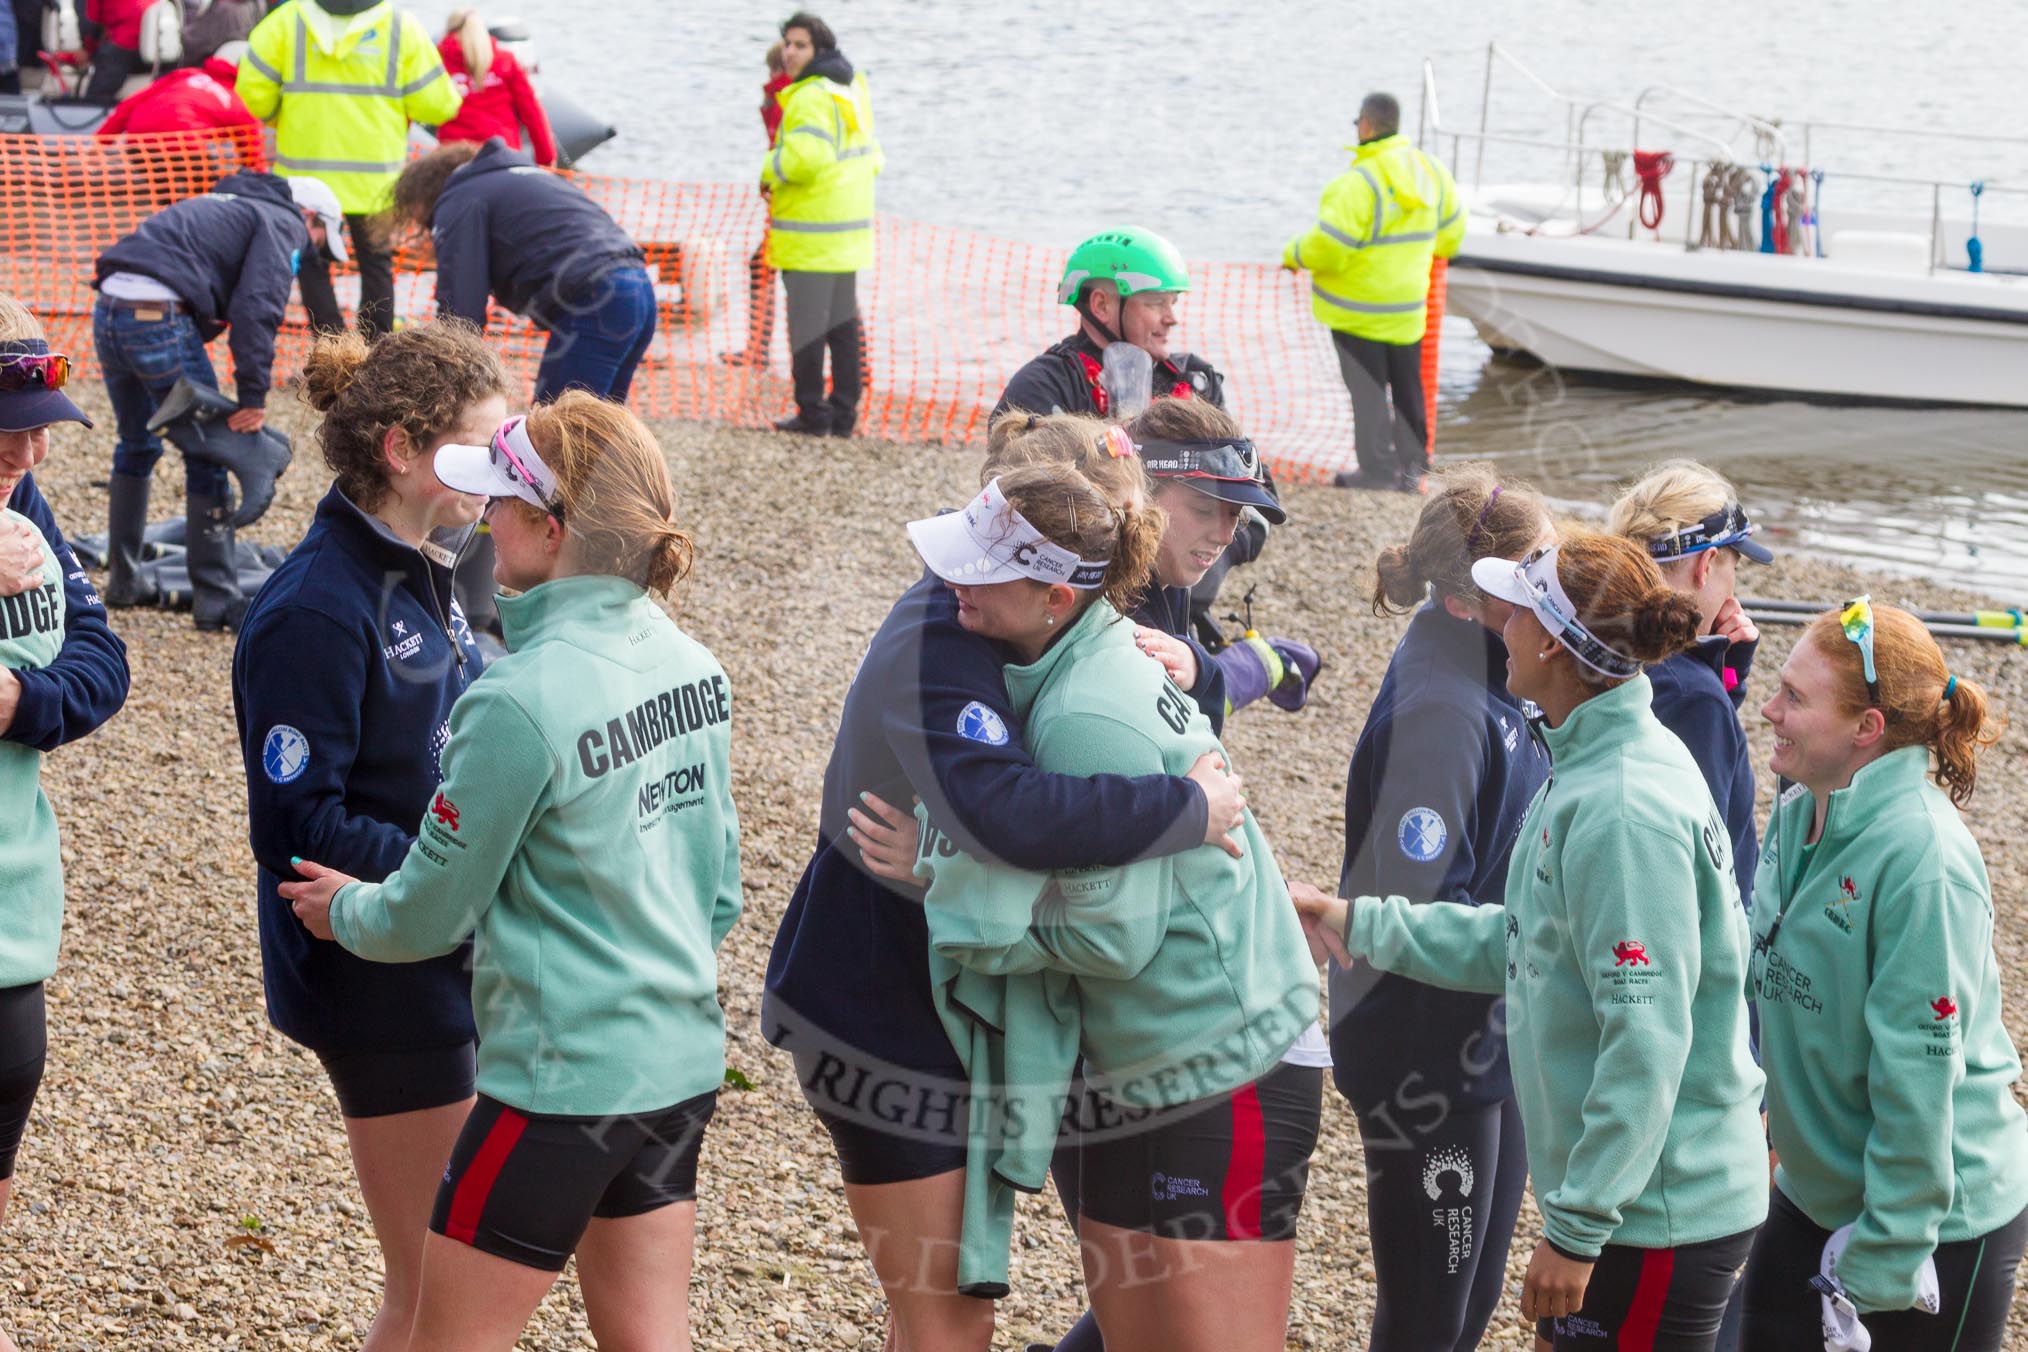 The Boat Race season 2016 -  The Cancer Research Women's Boat Race.
River Thames between Putney Bridge and Mortlake,
London SW15,

United Kingdom,
on 27 March 2016 at 14:44, image #324